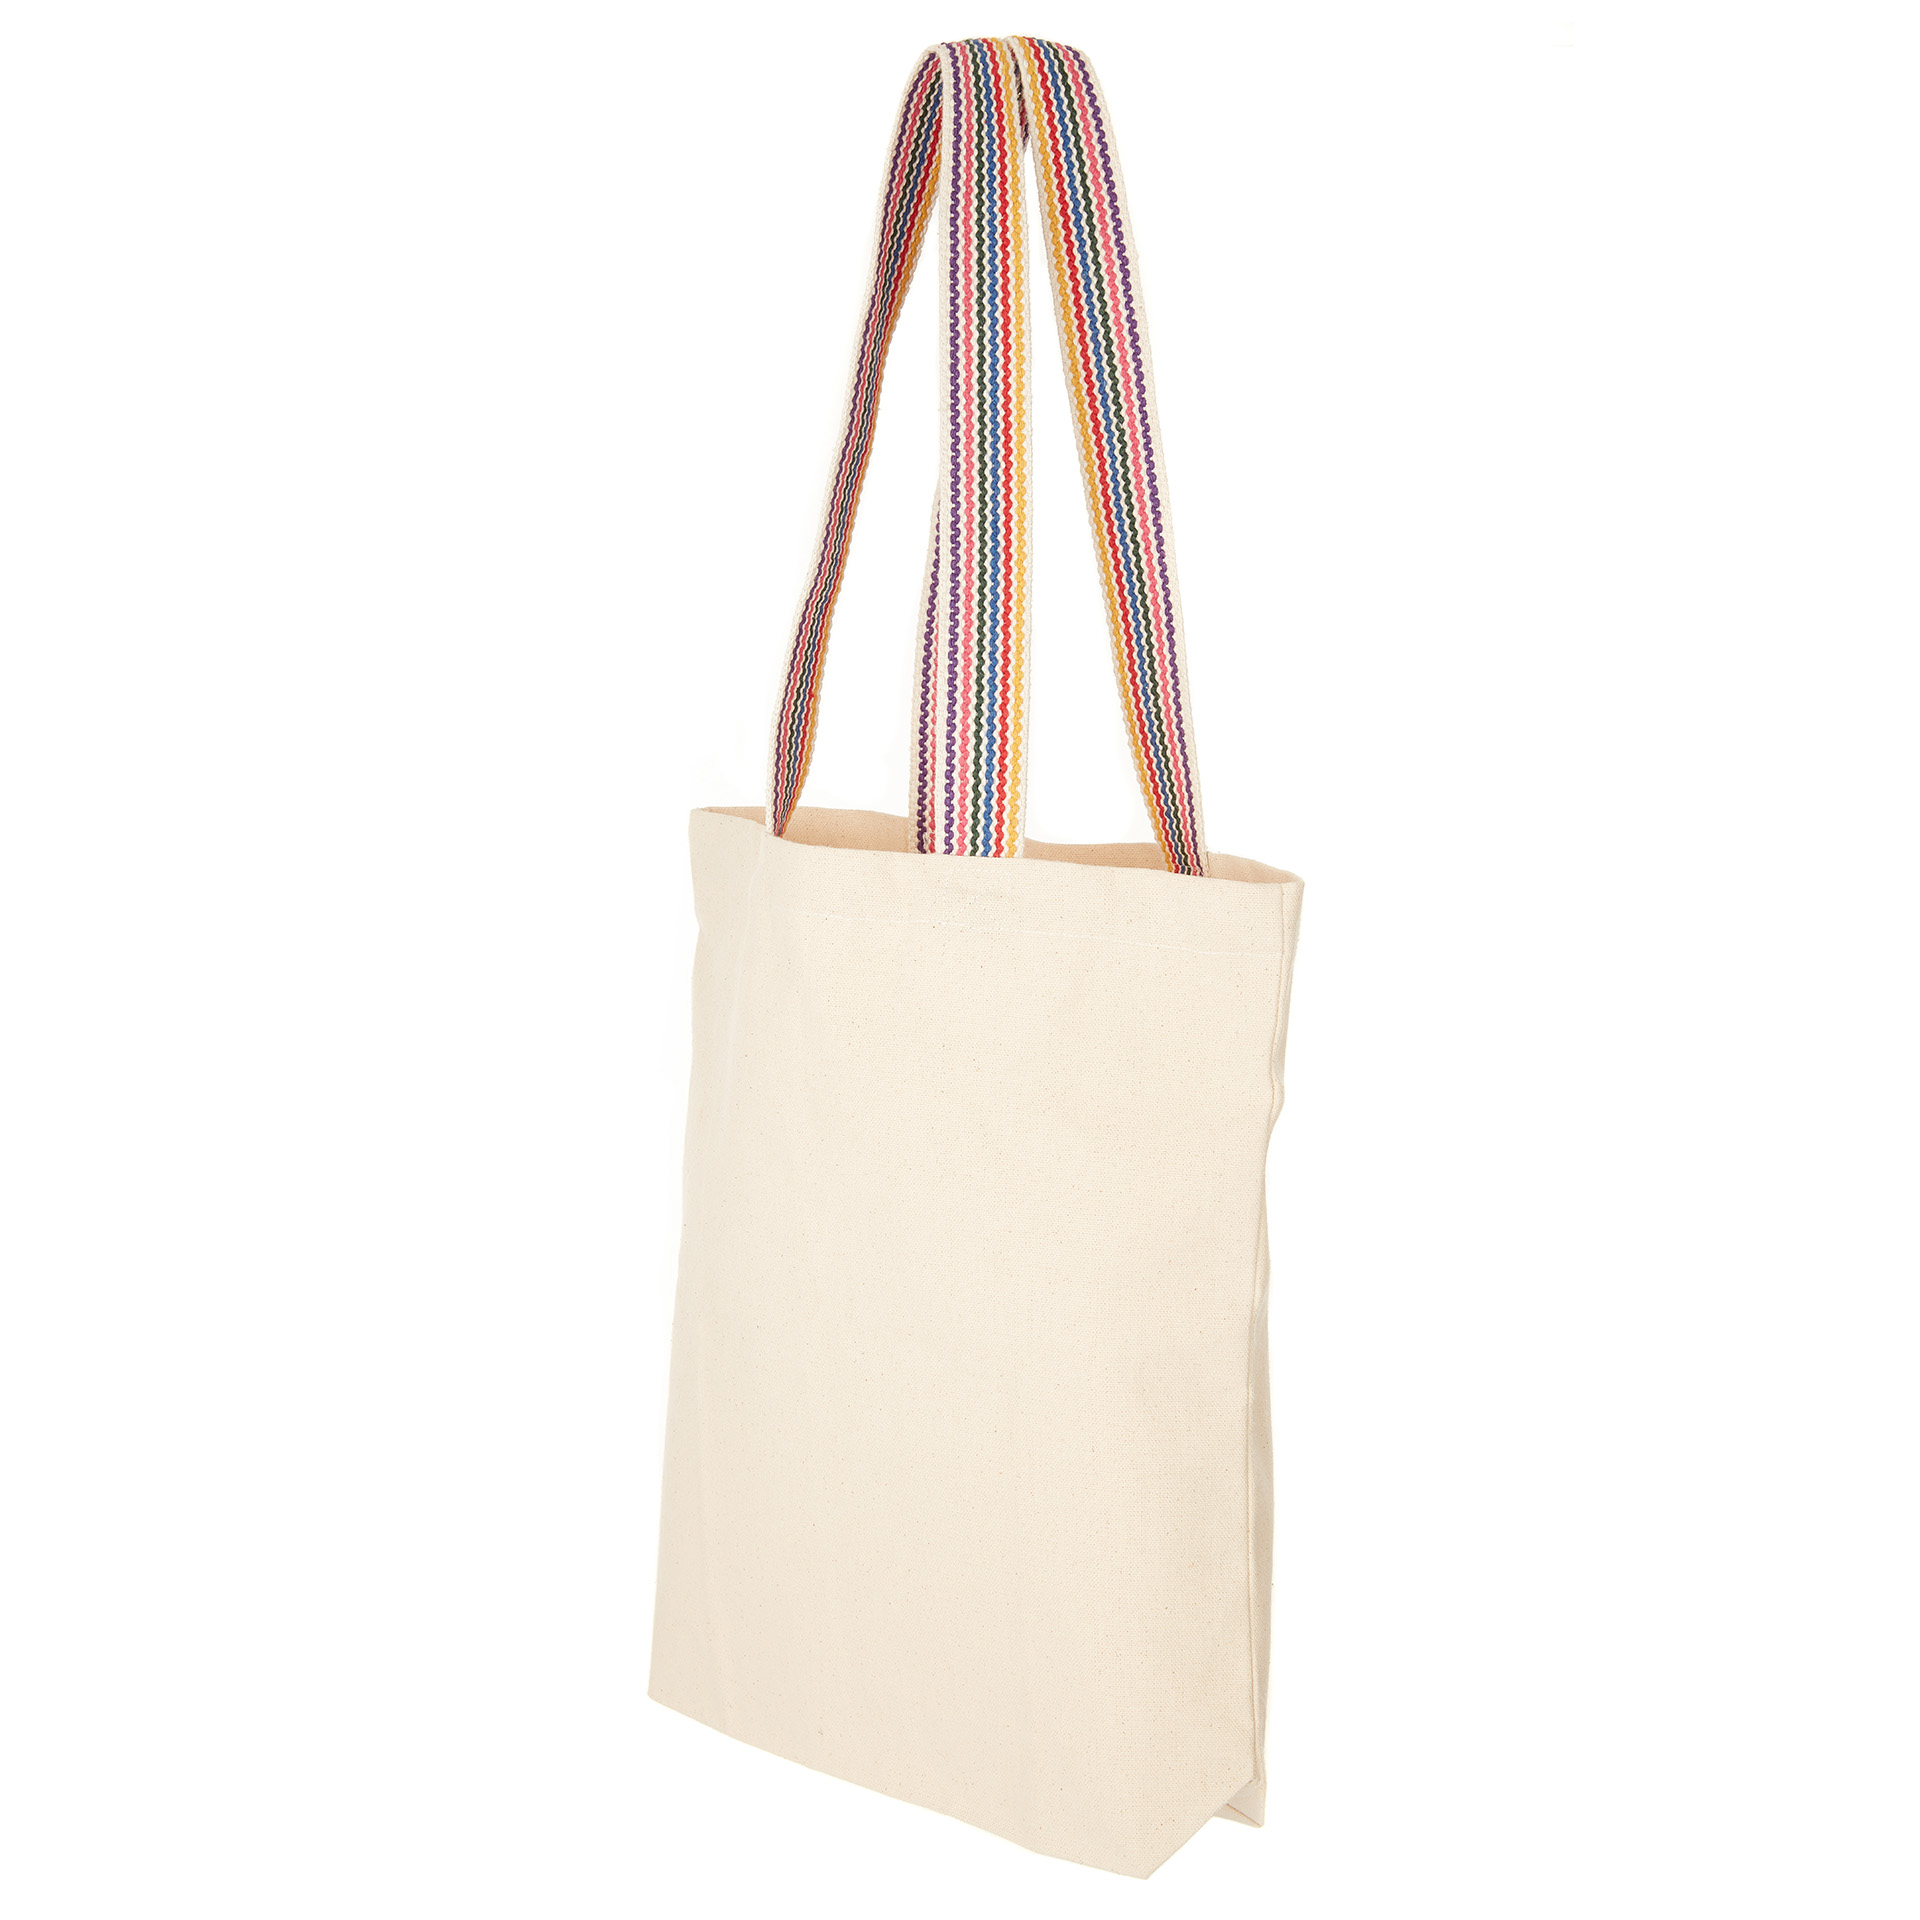 The Green & Good Notting Hill Shopper is made from unbleached & natural Fairtrade & Organic cotton. Heavy duty bag that is hip and colourful, it comes with long multi-coloured shoulder handle with bottom gusset. Ethically produced in India in an audited factory. 10oz / 280gsm cotton. Oekotex 100 certified.